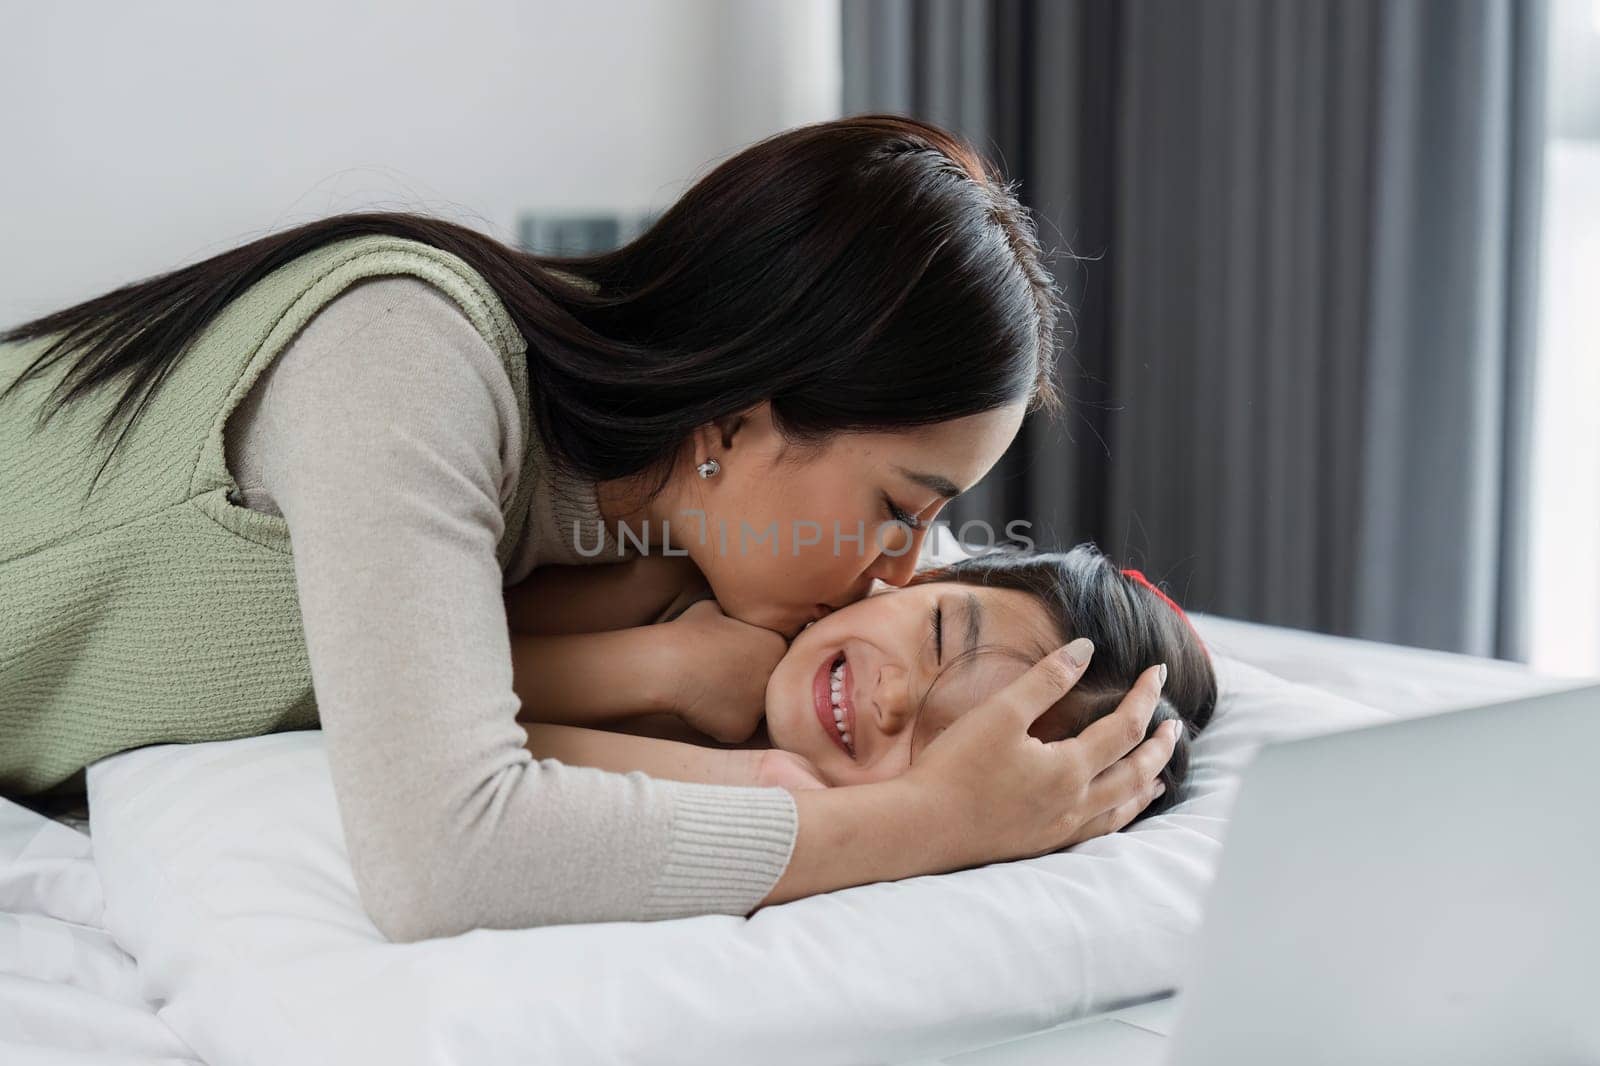 A woman is kissing a child on the head. The woman is wearing a green shirt